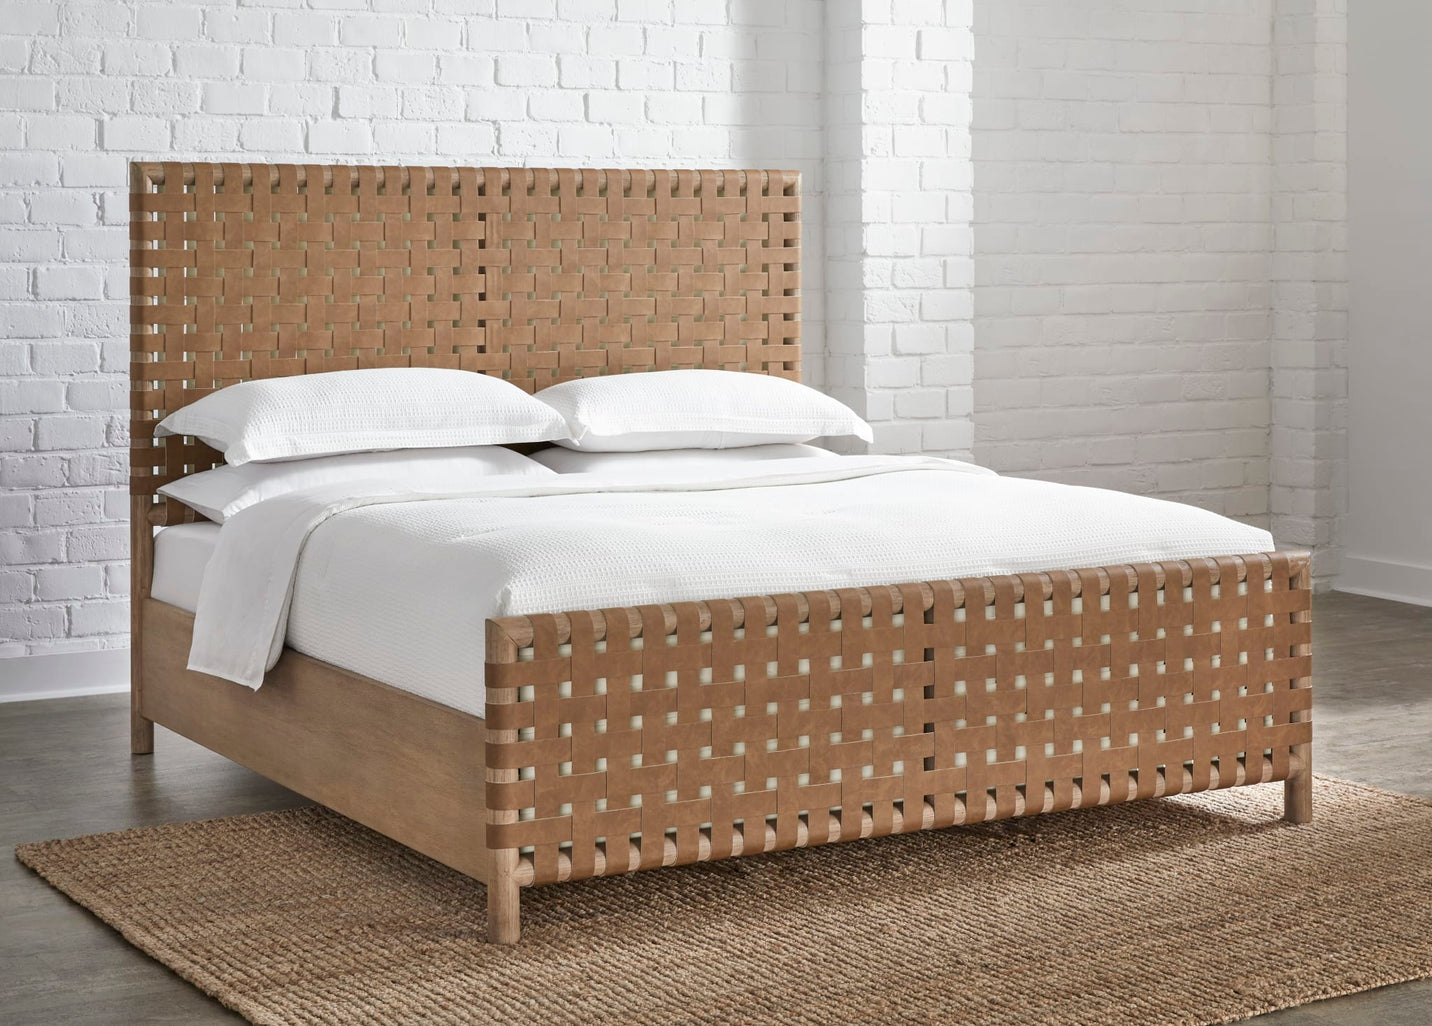 Dorsey Woven Panel Bed in Granola and Ginger